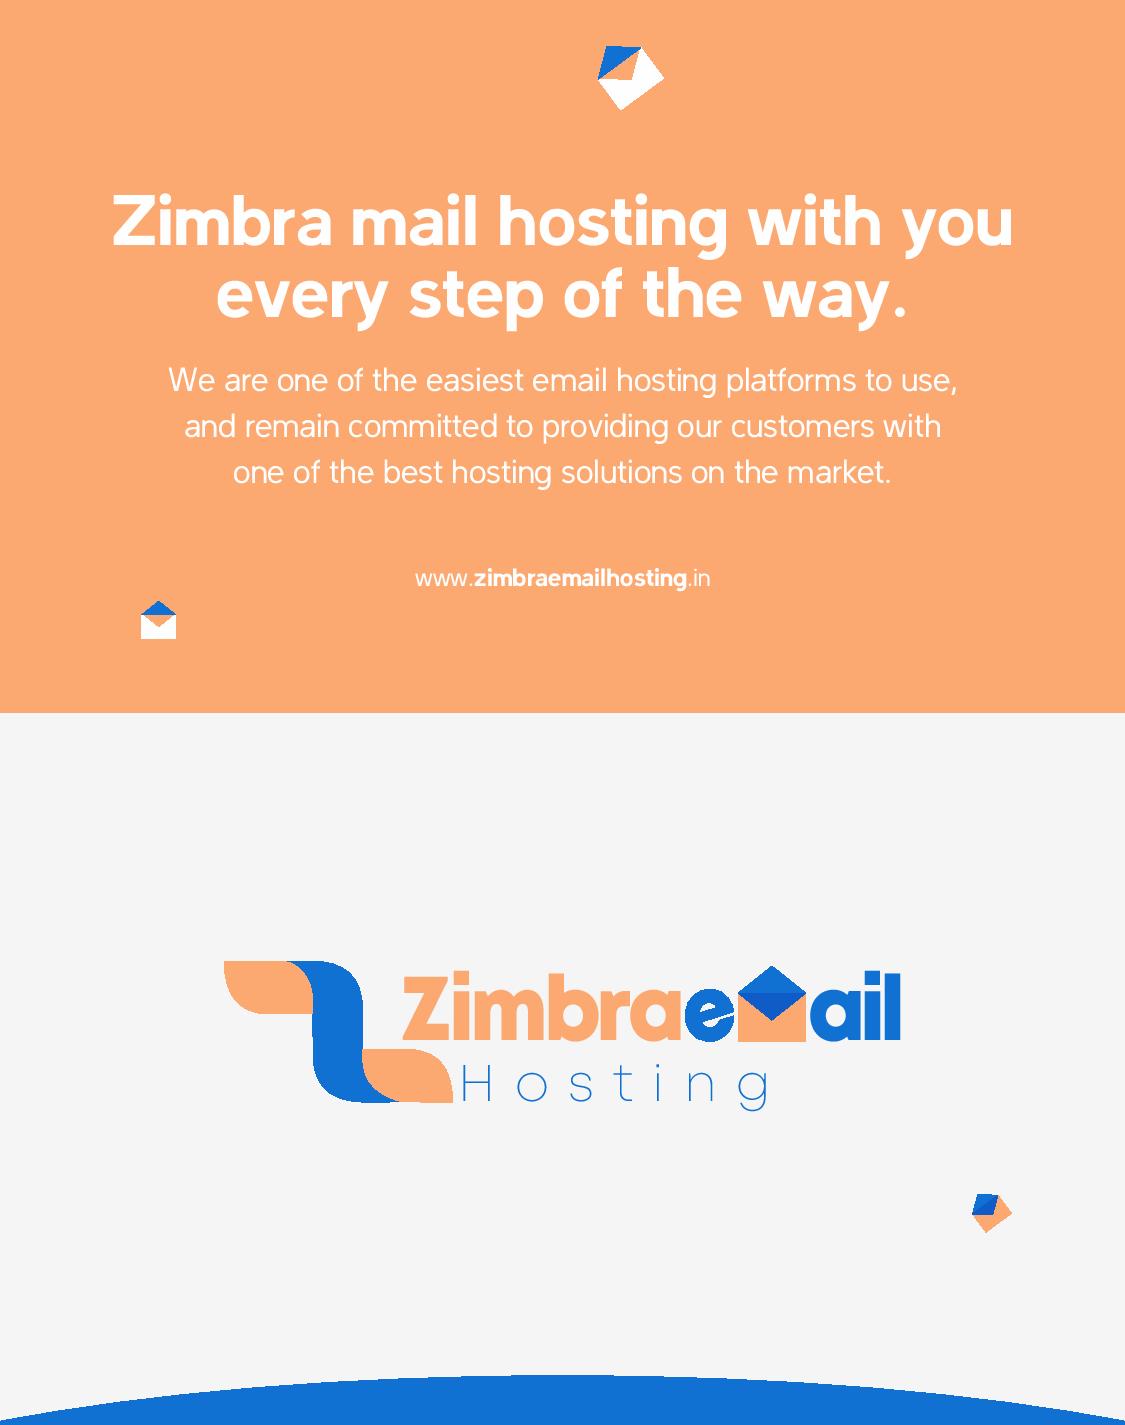 zimbra mail hosting with you